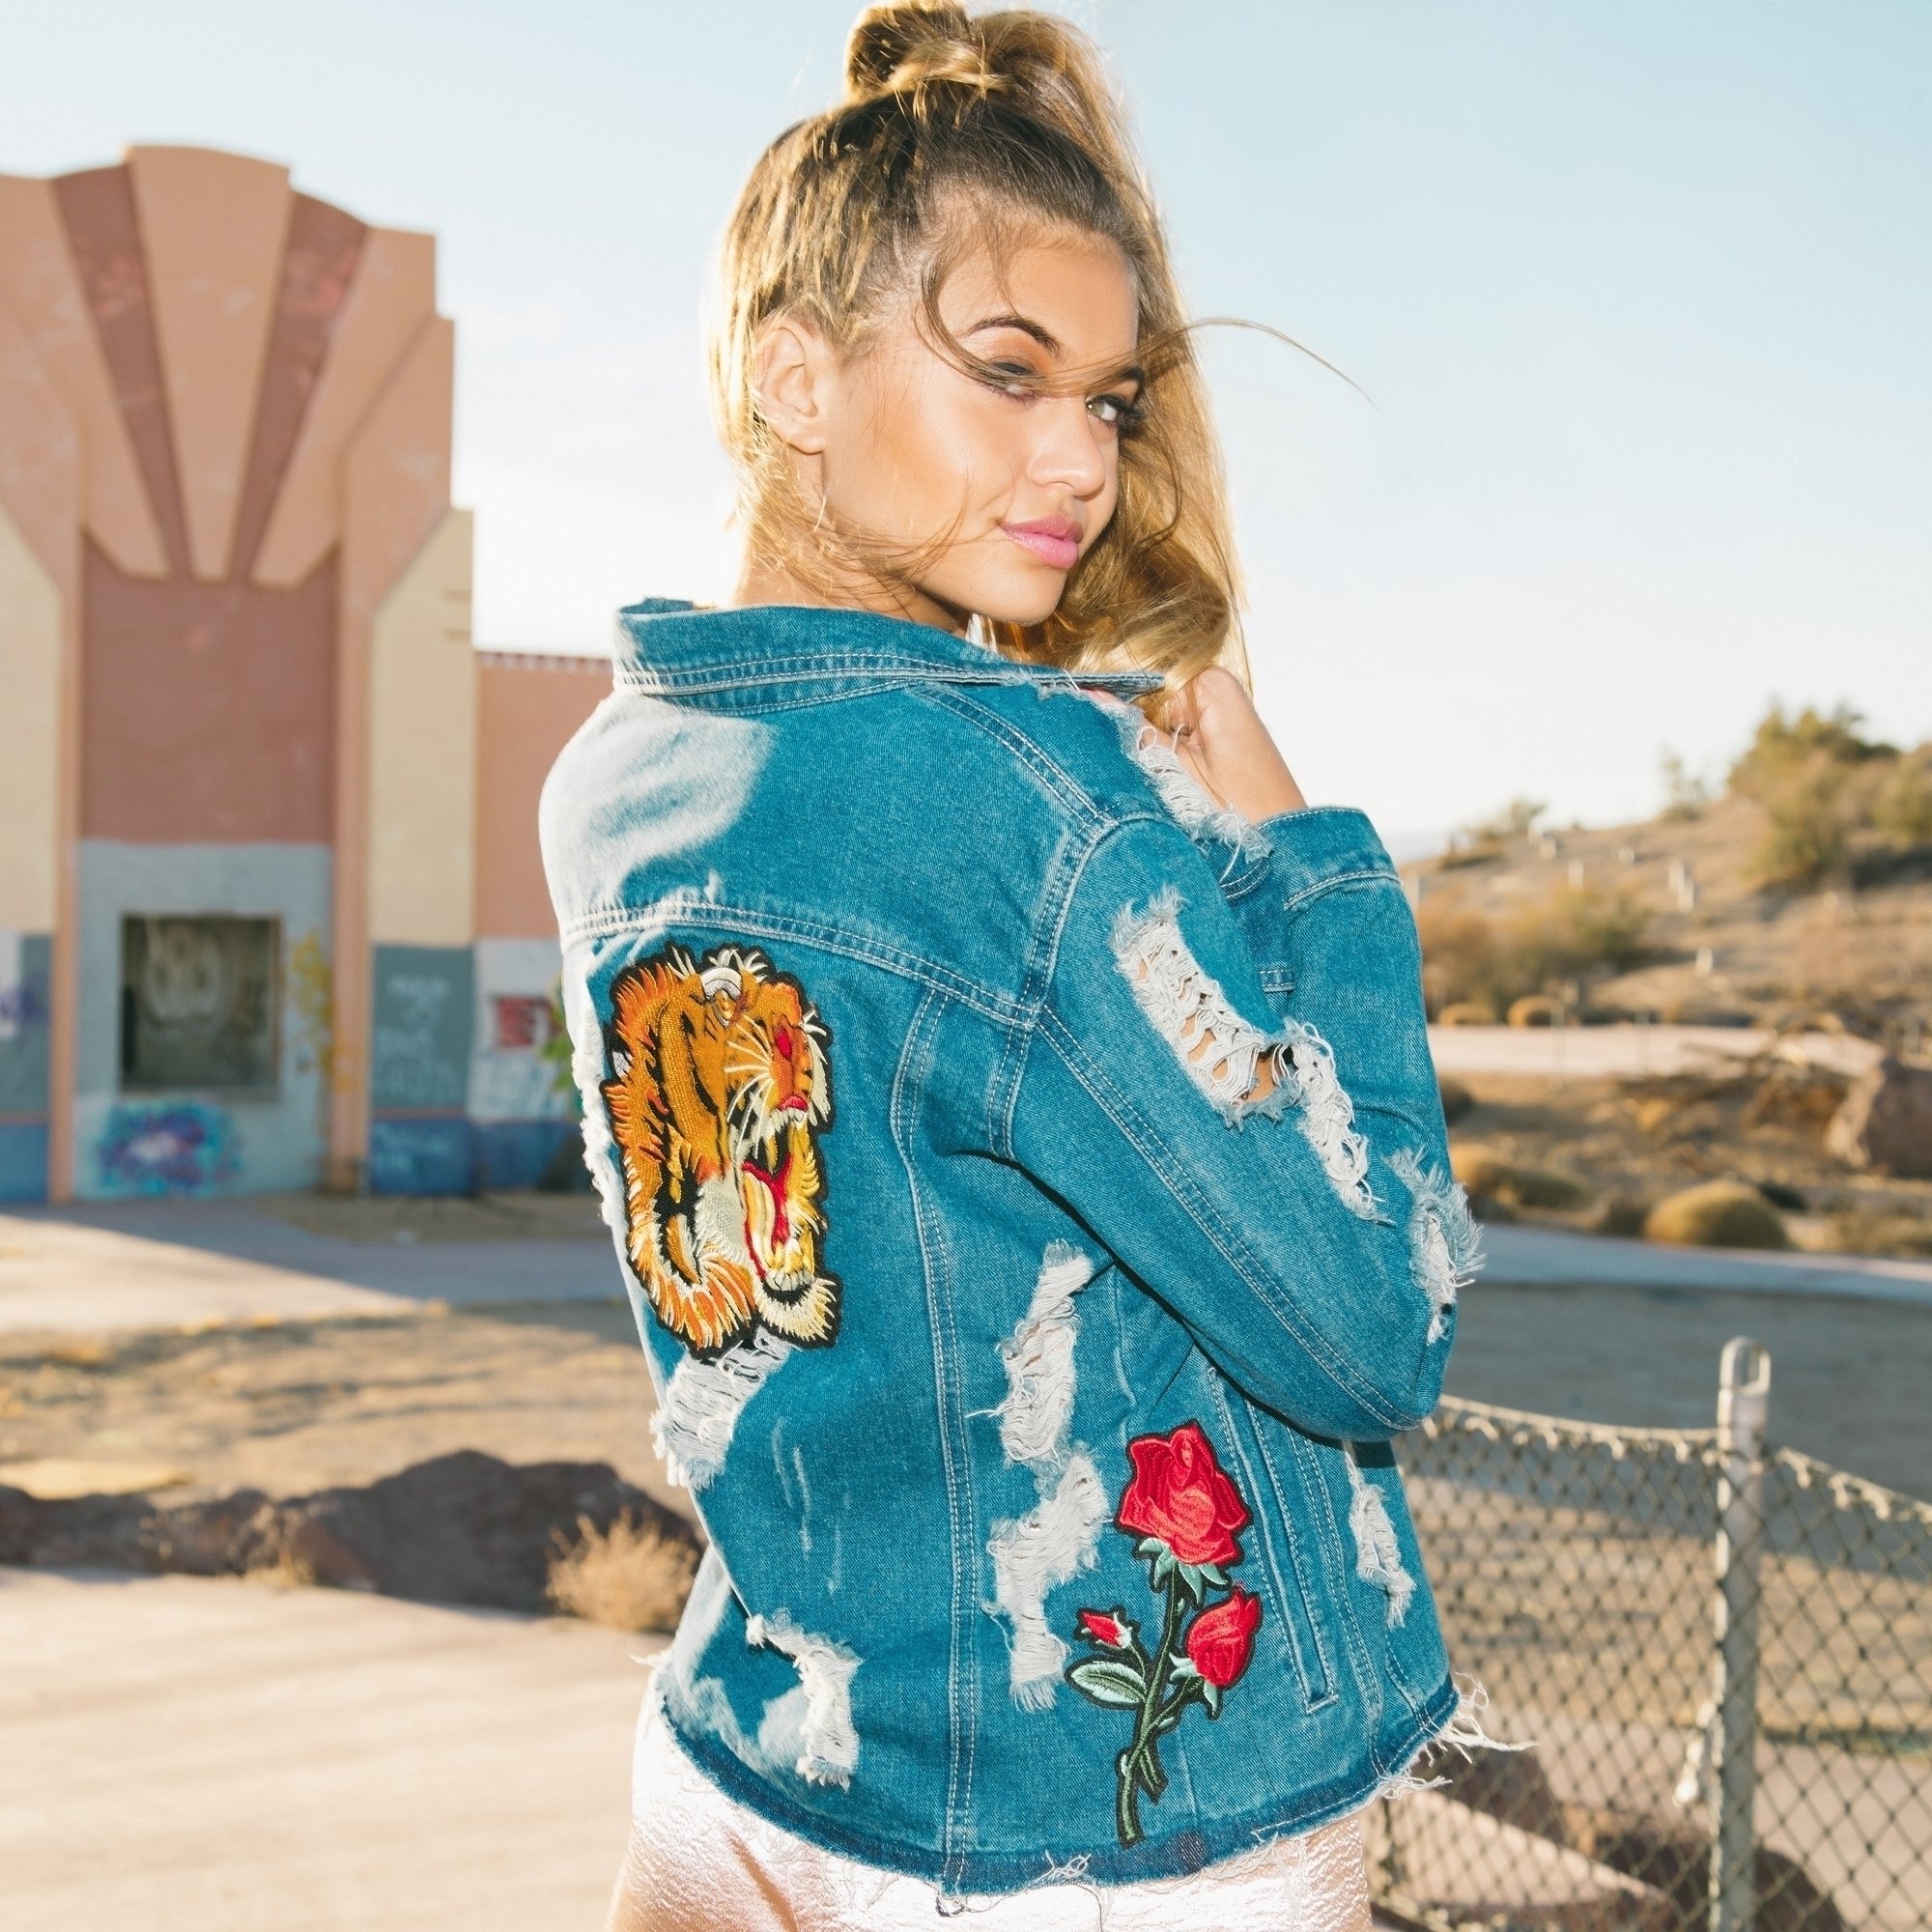 PrettyLittleThing on Twitter: "💘 Wild hearts only 💘 The Evia rose + tiger  badge denim jacket is EVERYTHING 😍🔥 https://t.co/kZHugcH8rK #pltstyle  https://t.co/MPiWOQJQpx" / Twitter